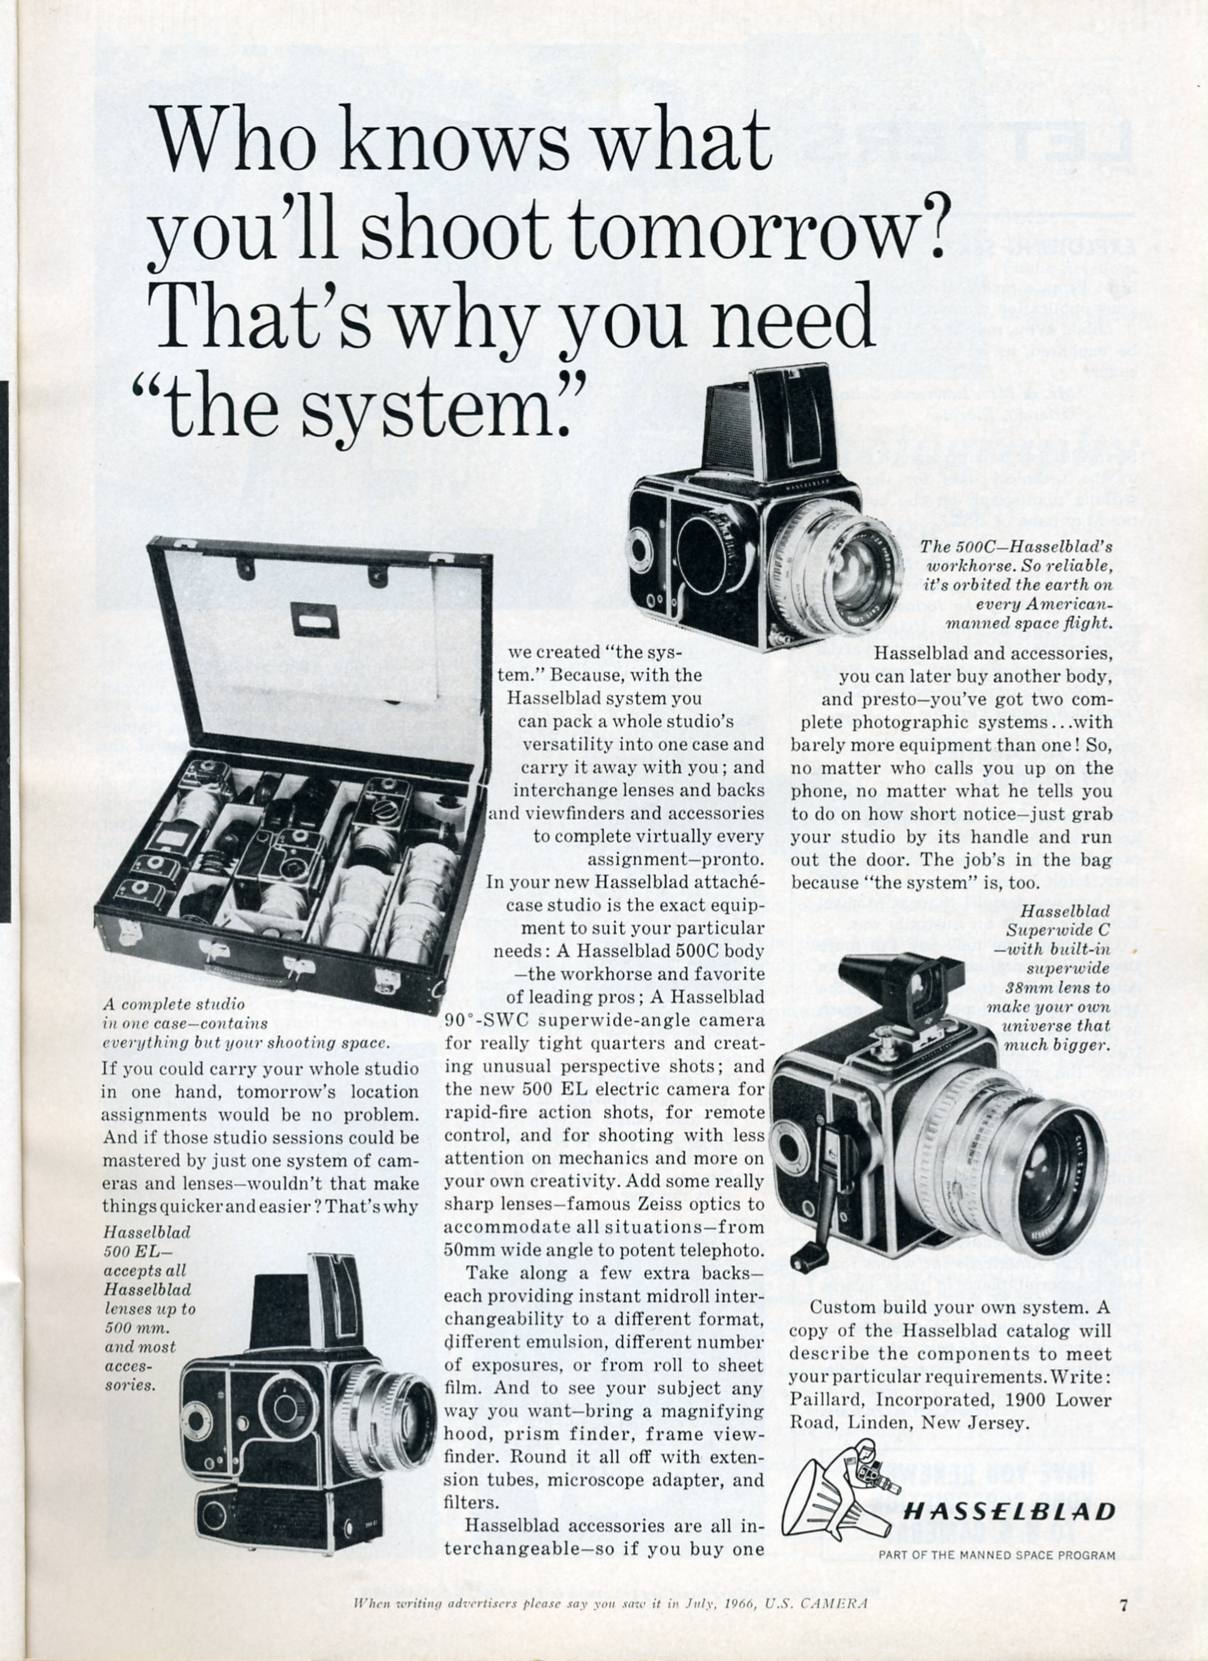 an old camera is shown with instructions for use in the print